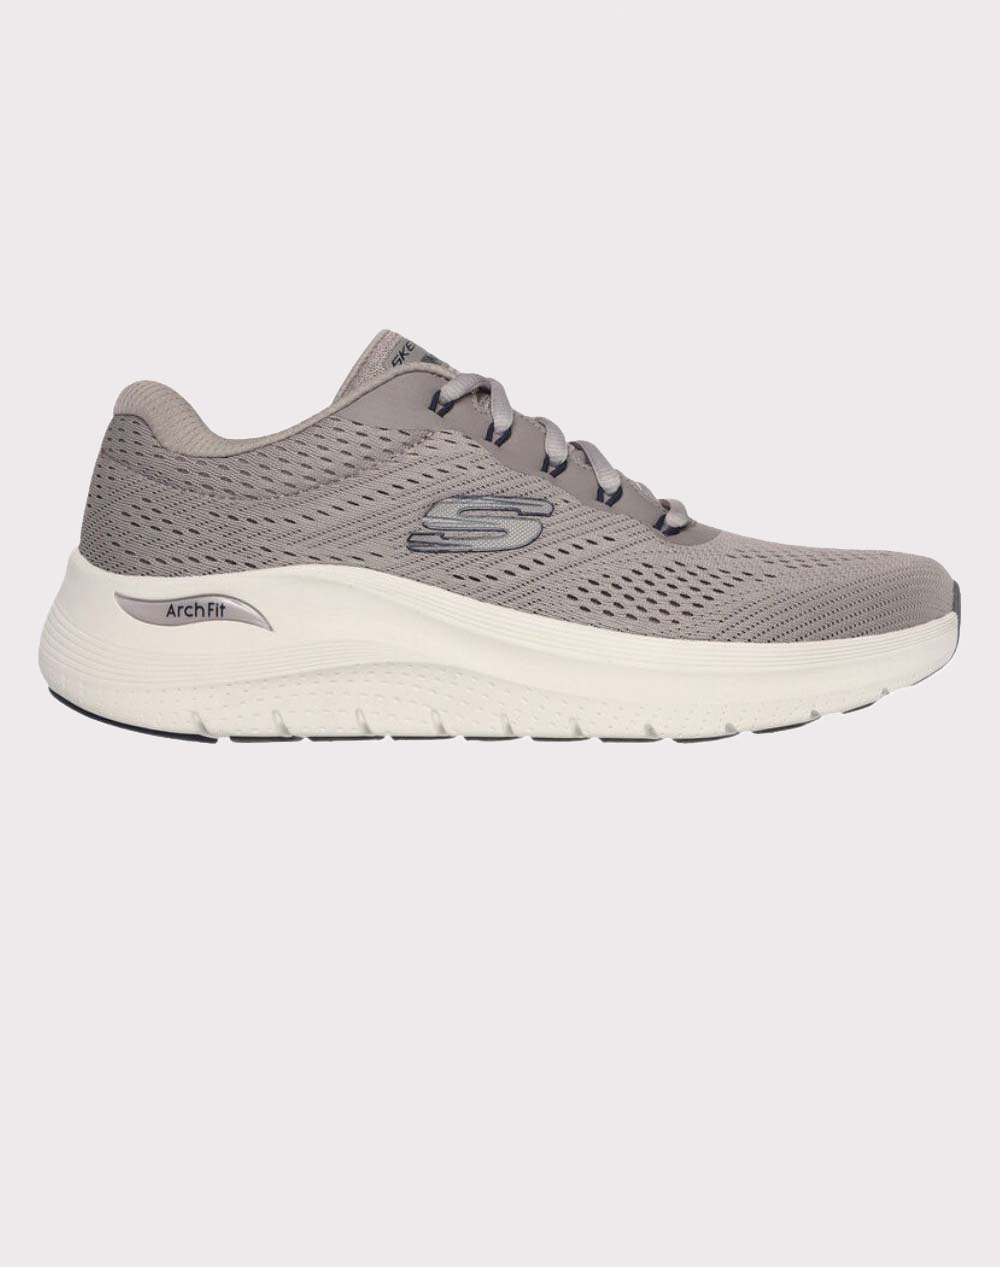 SKECHERS Arch Fit Engineered Mesh Lace Up 232700_TPE-TPE Gray